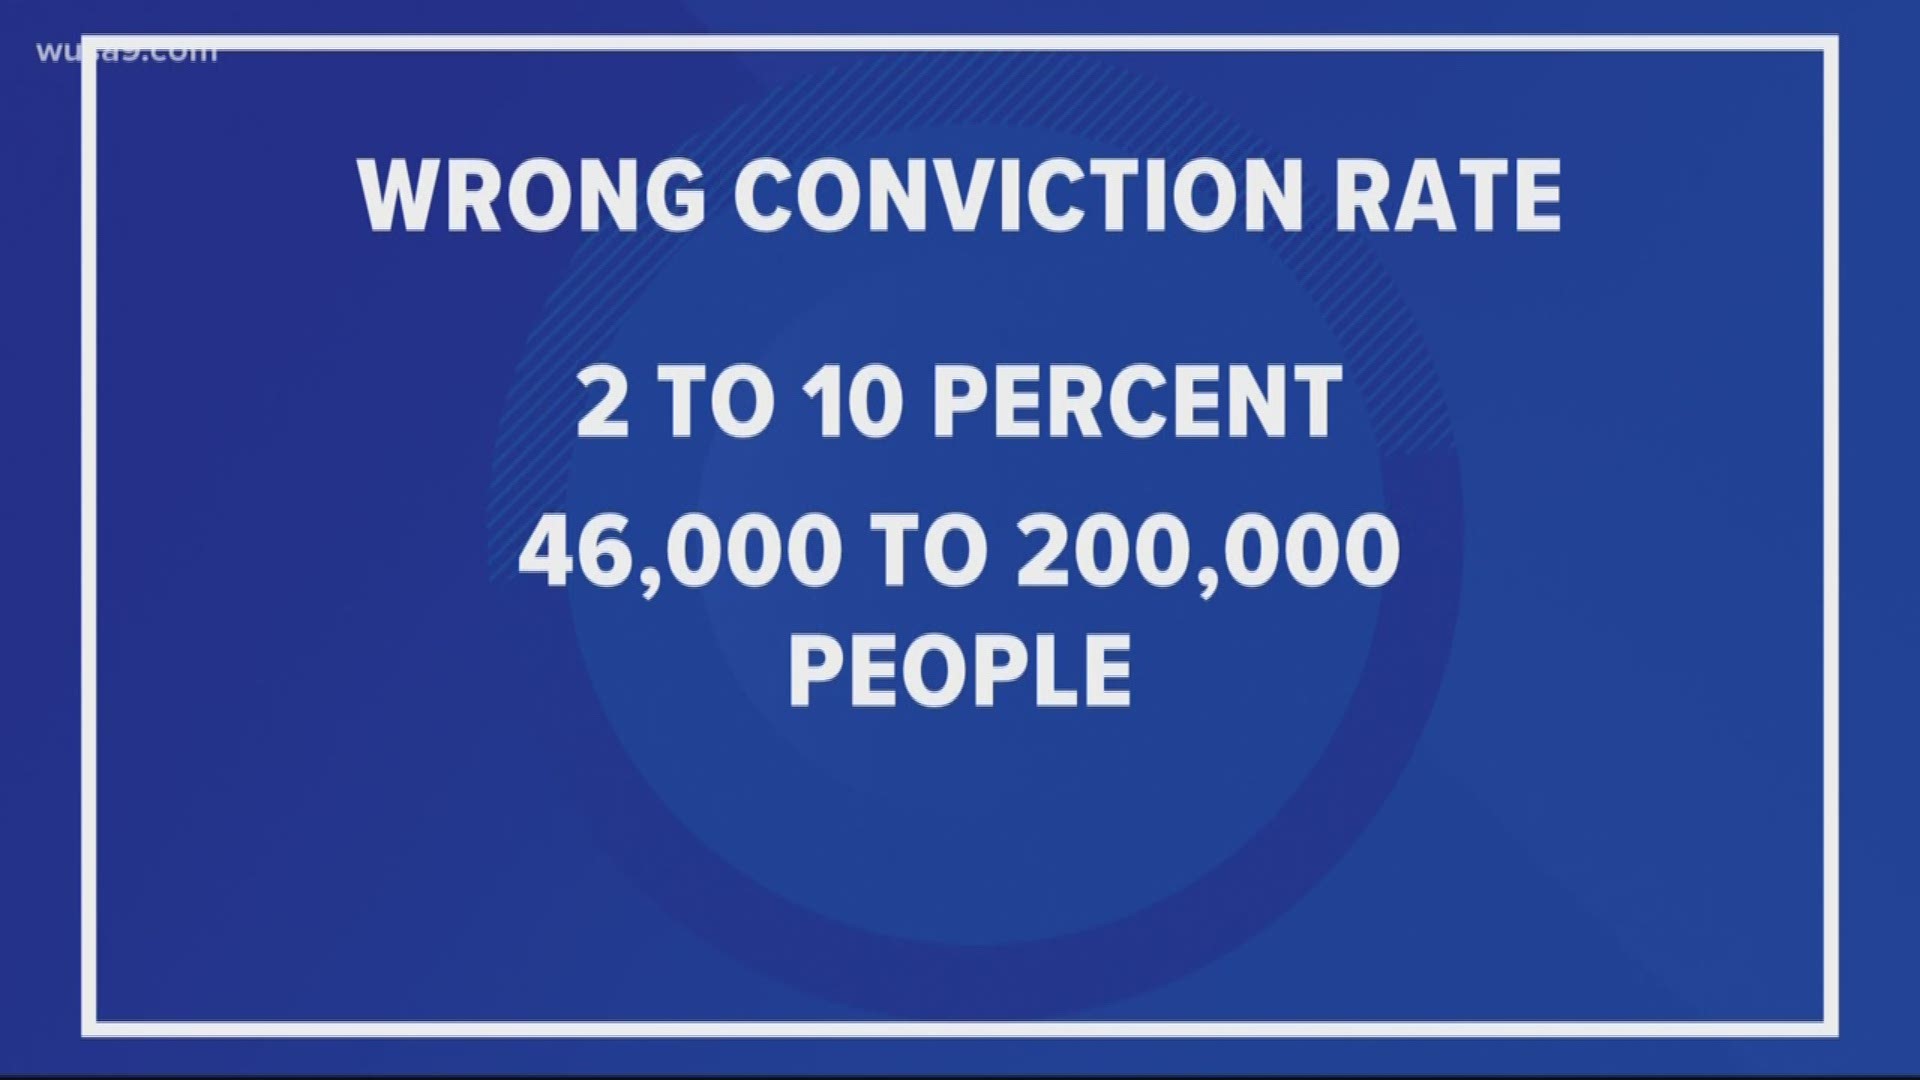 It's estimated that the wrongful conviction rate in this country is anywhere between 2 to 10%. Our system is not perfect and sadly innocent people pay the cost.